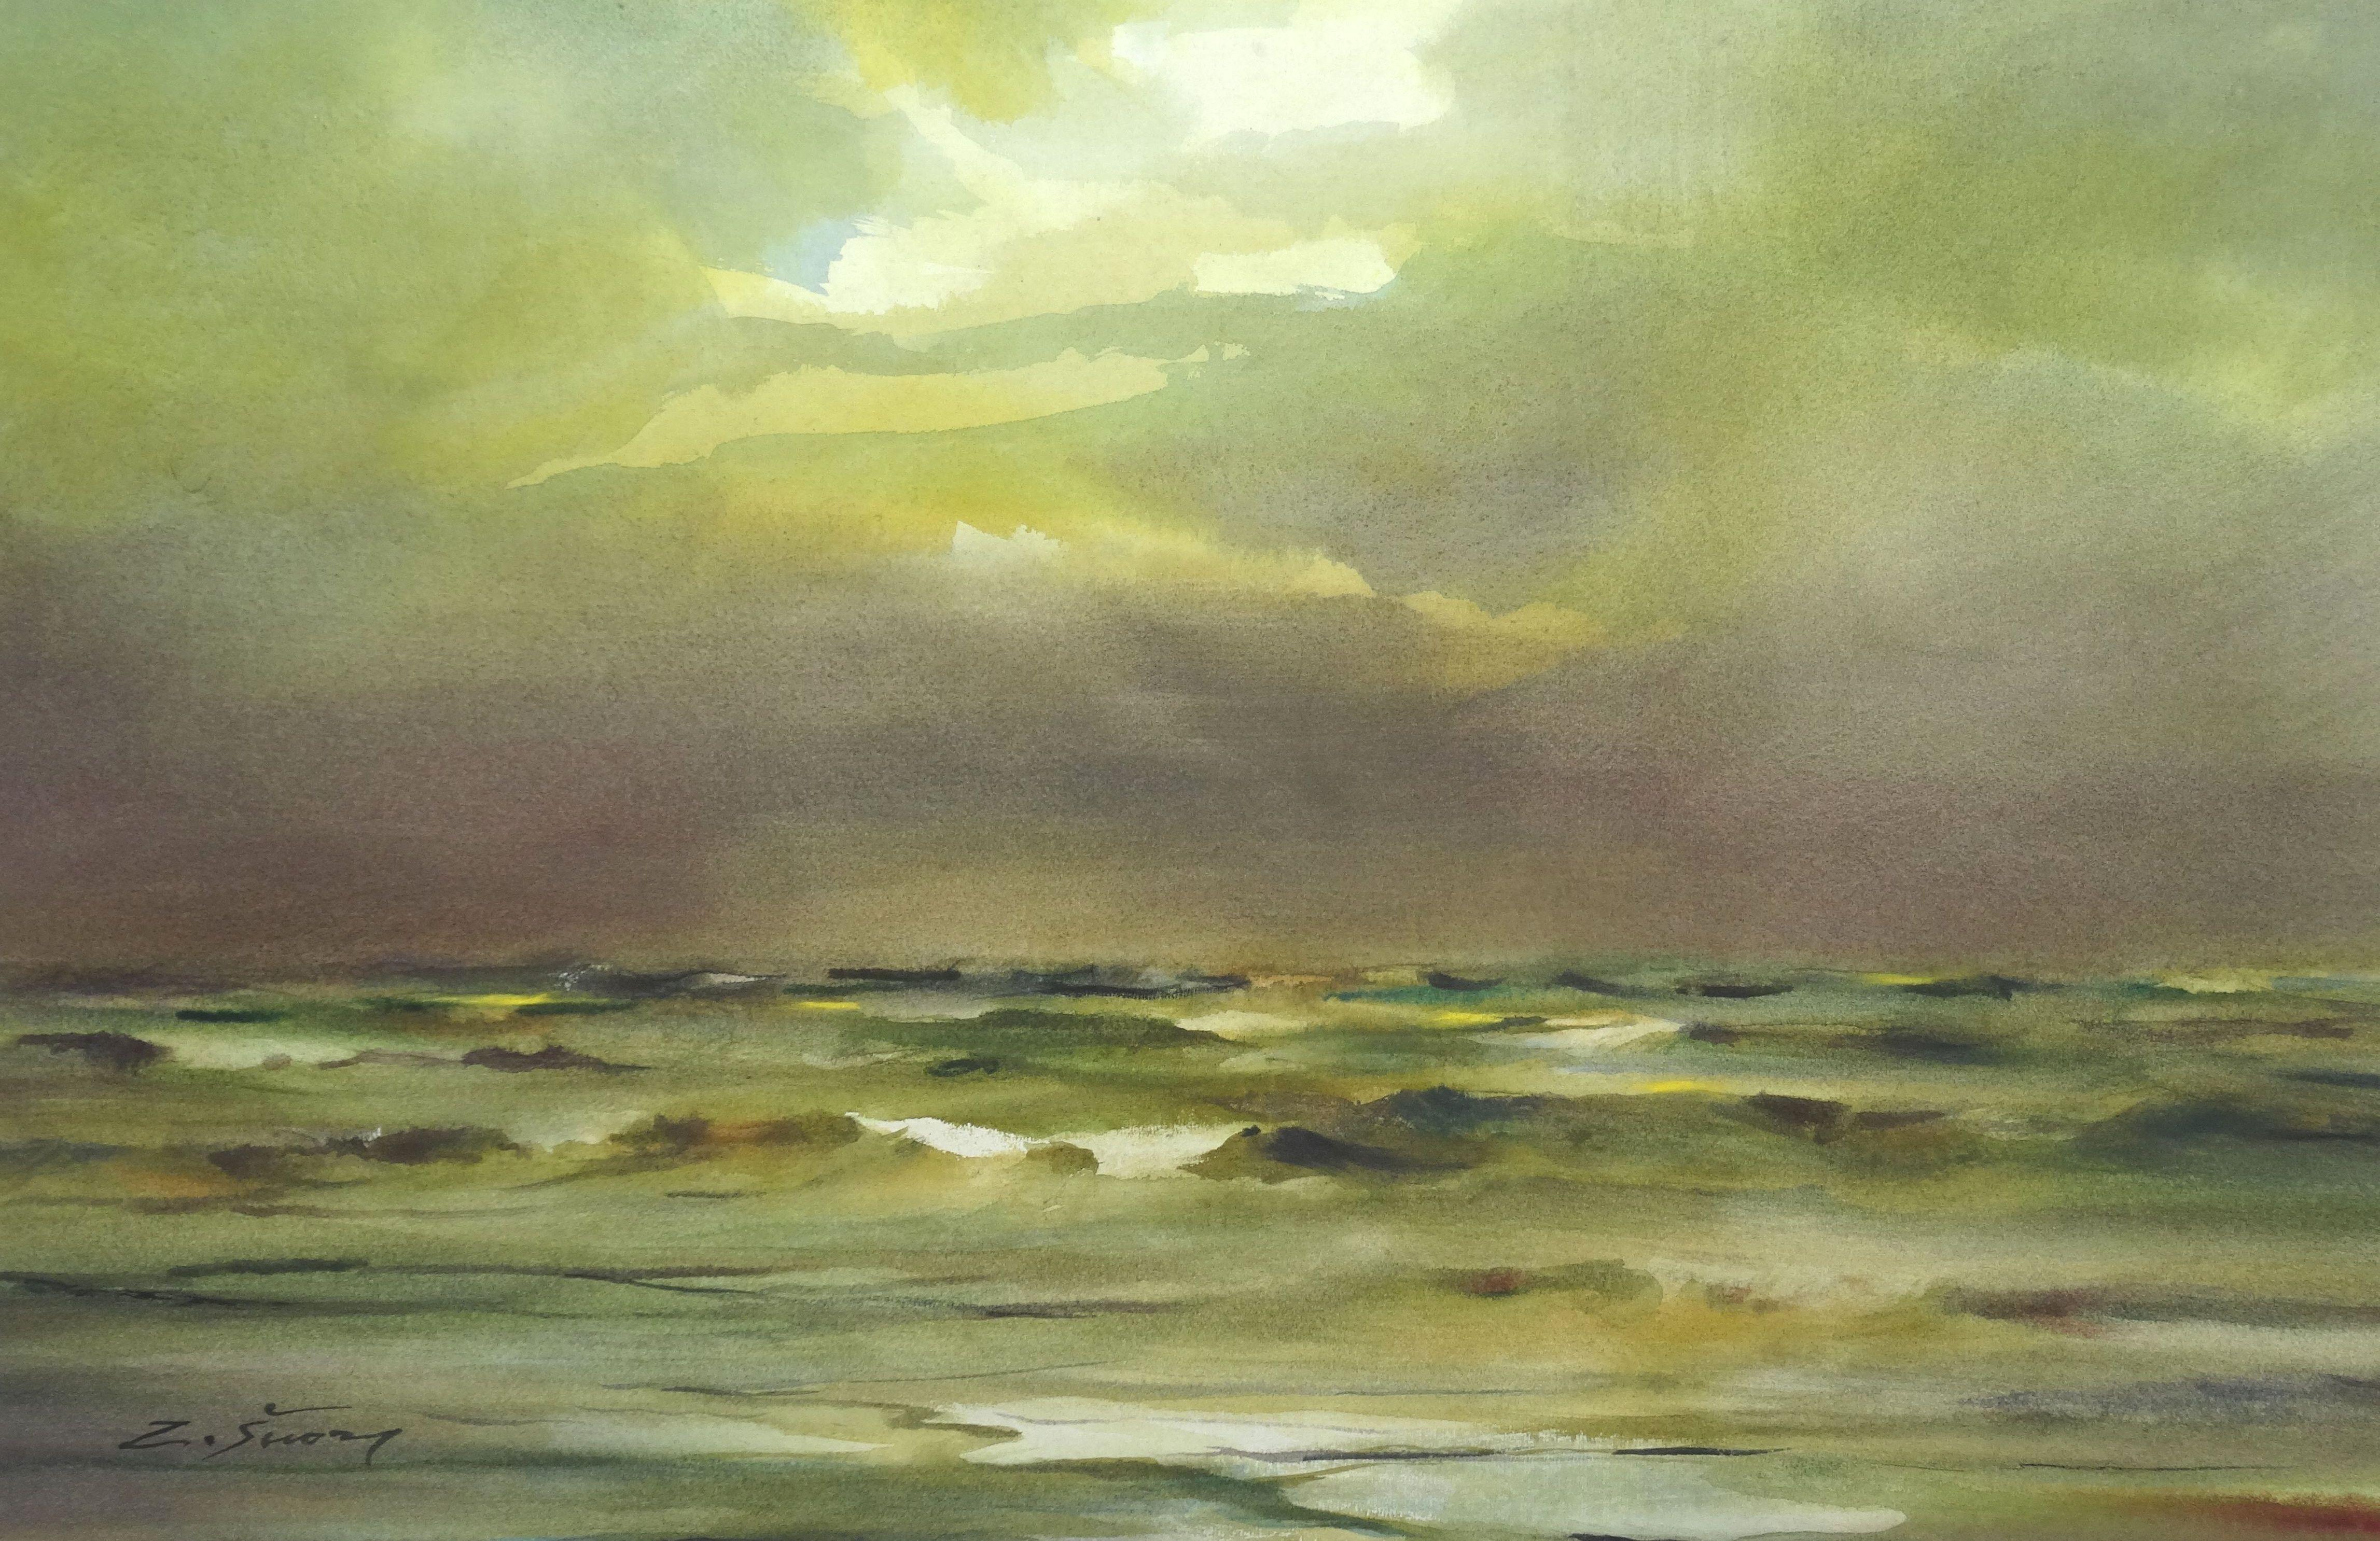 Zigmunds Snore  Landscape Painting - Morning at the sea. 2020. Watercolor, paper, 40 x 62 cm